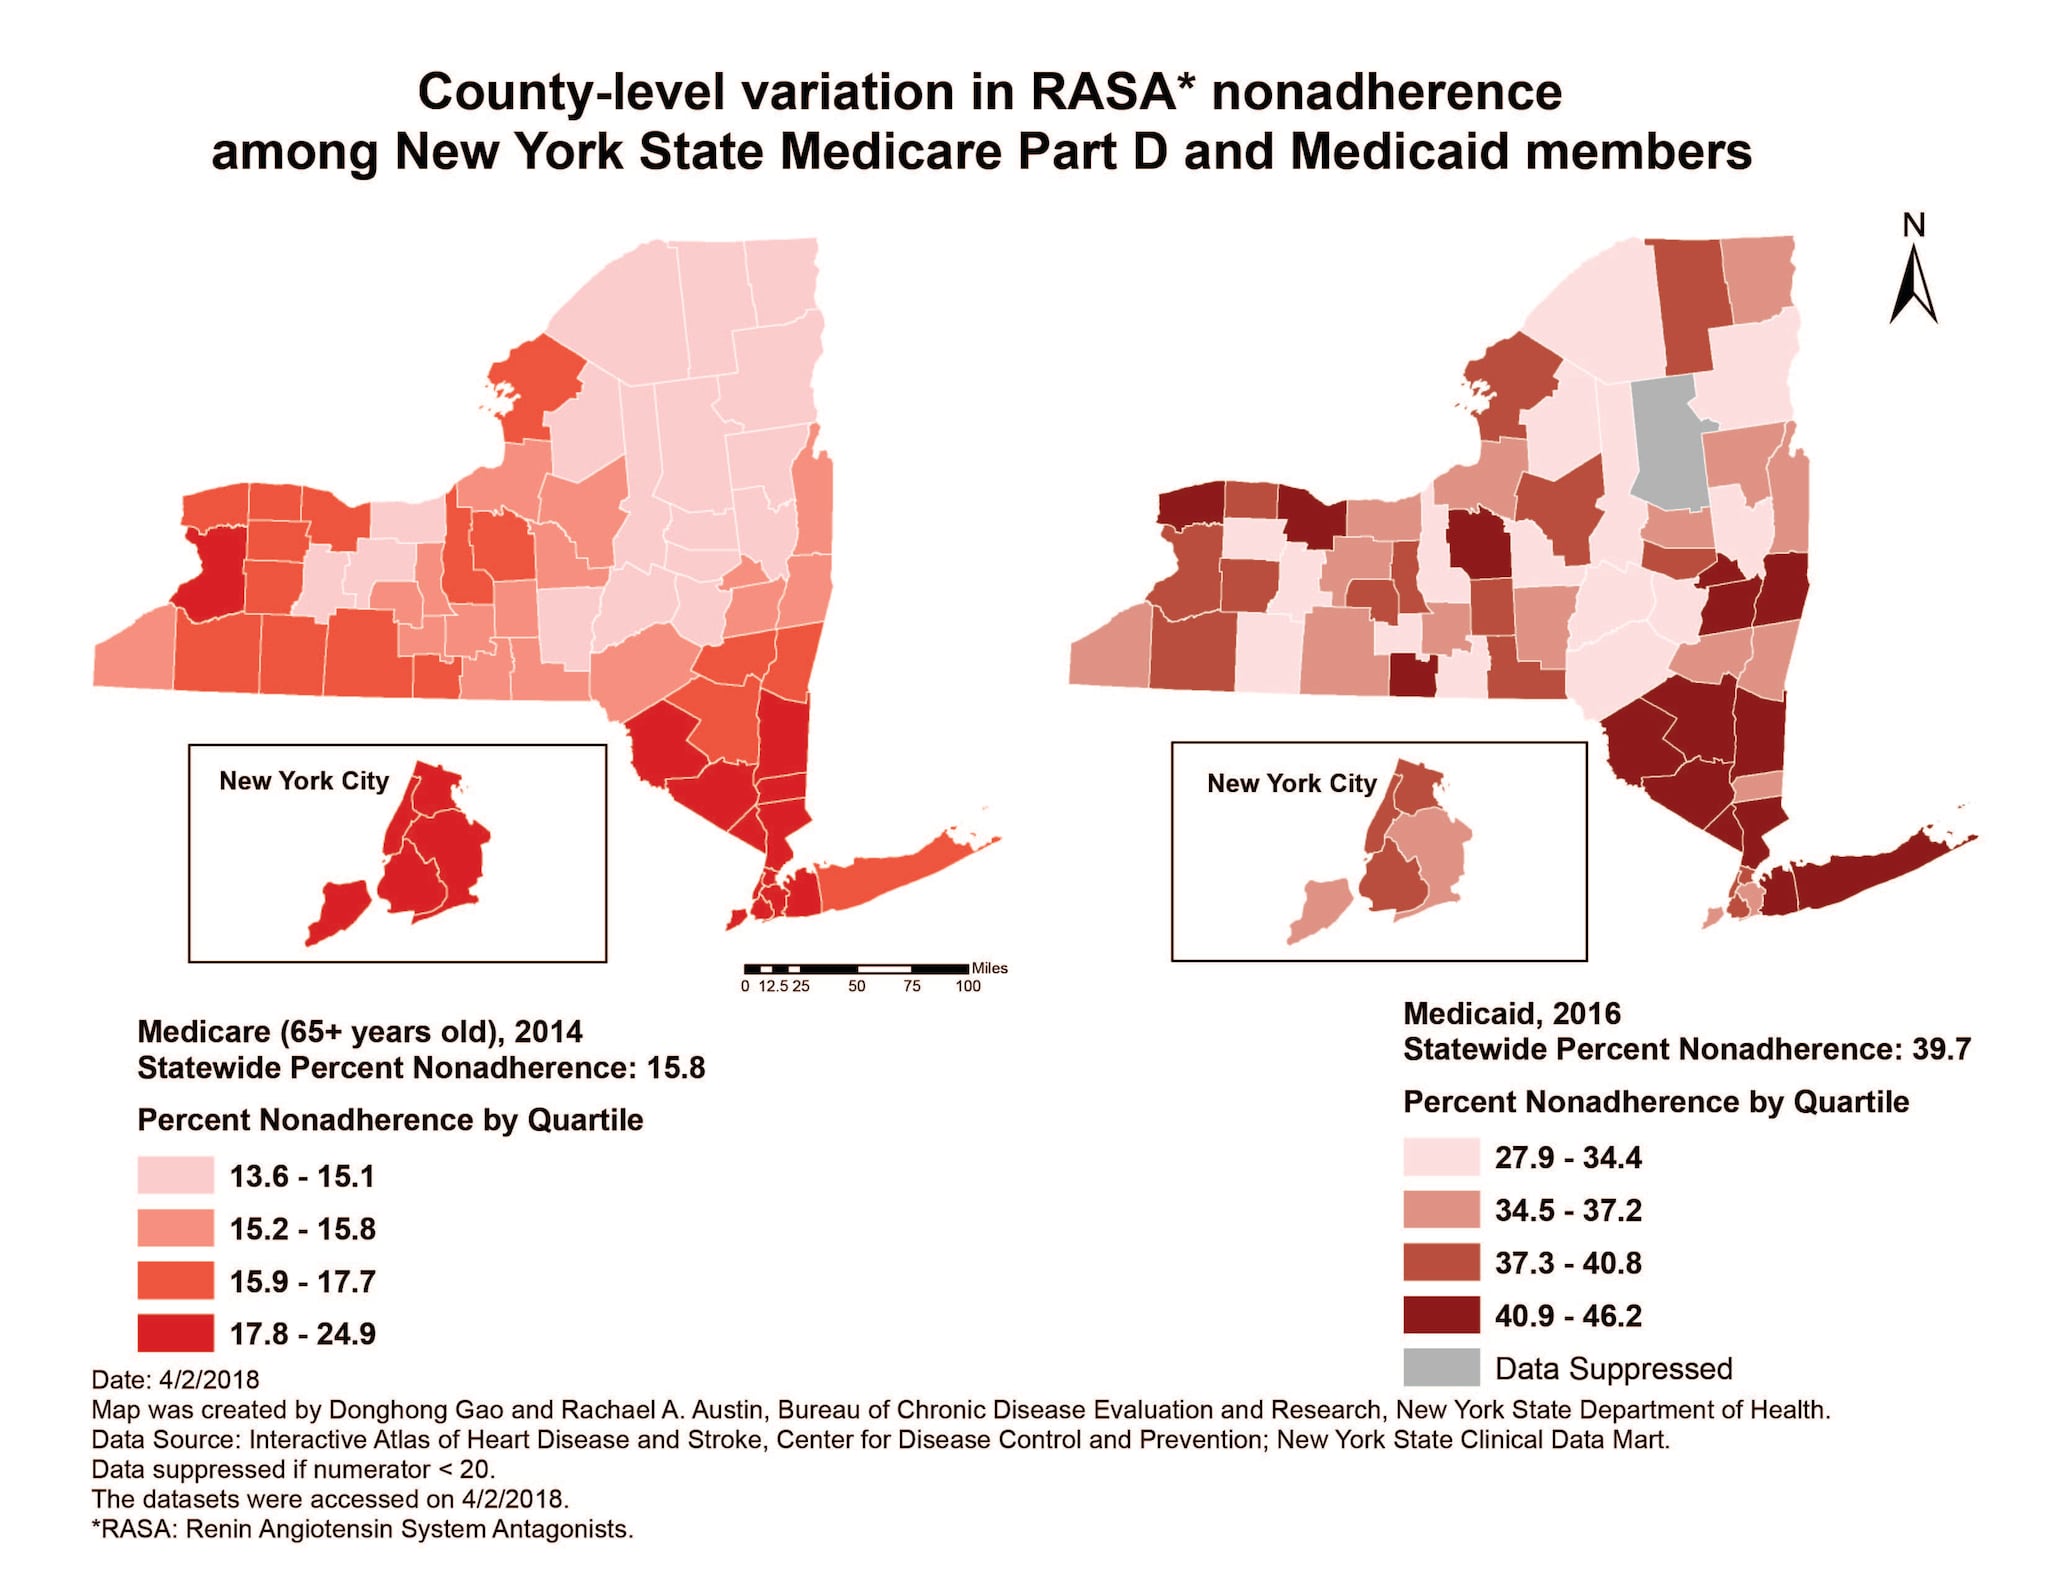 This map highlights geographic differences in medication nonadherence among Medicaid and Medicare members in NYS, as well as variation in non-adherence between the two groups.